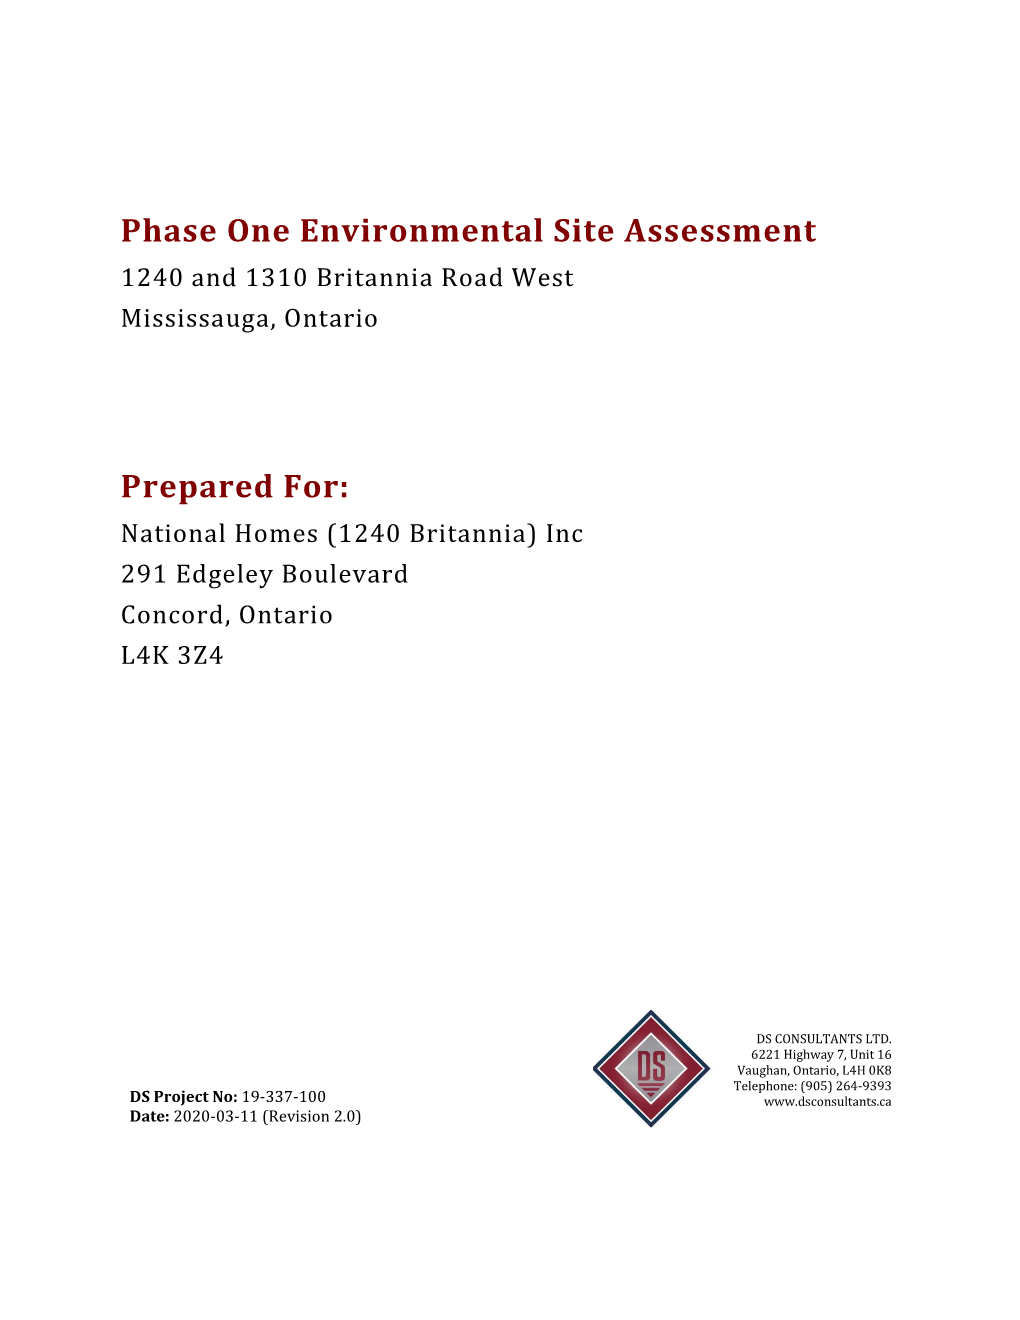 Phase One Environmental Site Assessment 1240 and 1310 Britannia Road West Mississauga, Ontario